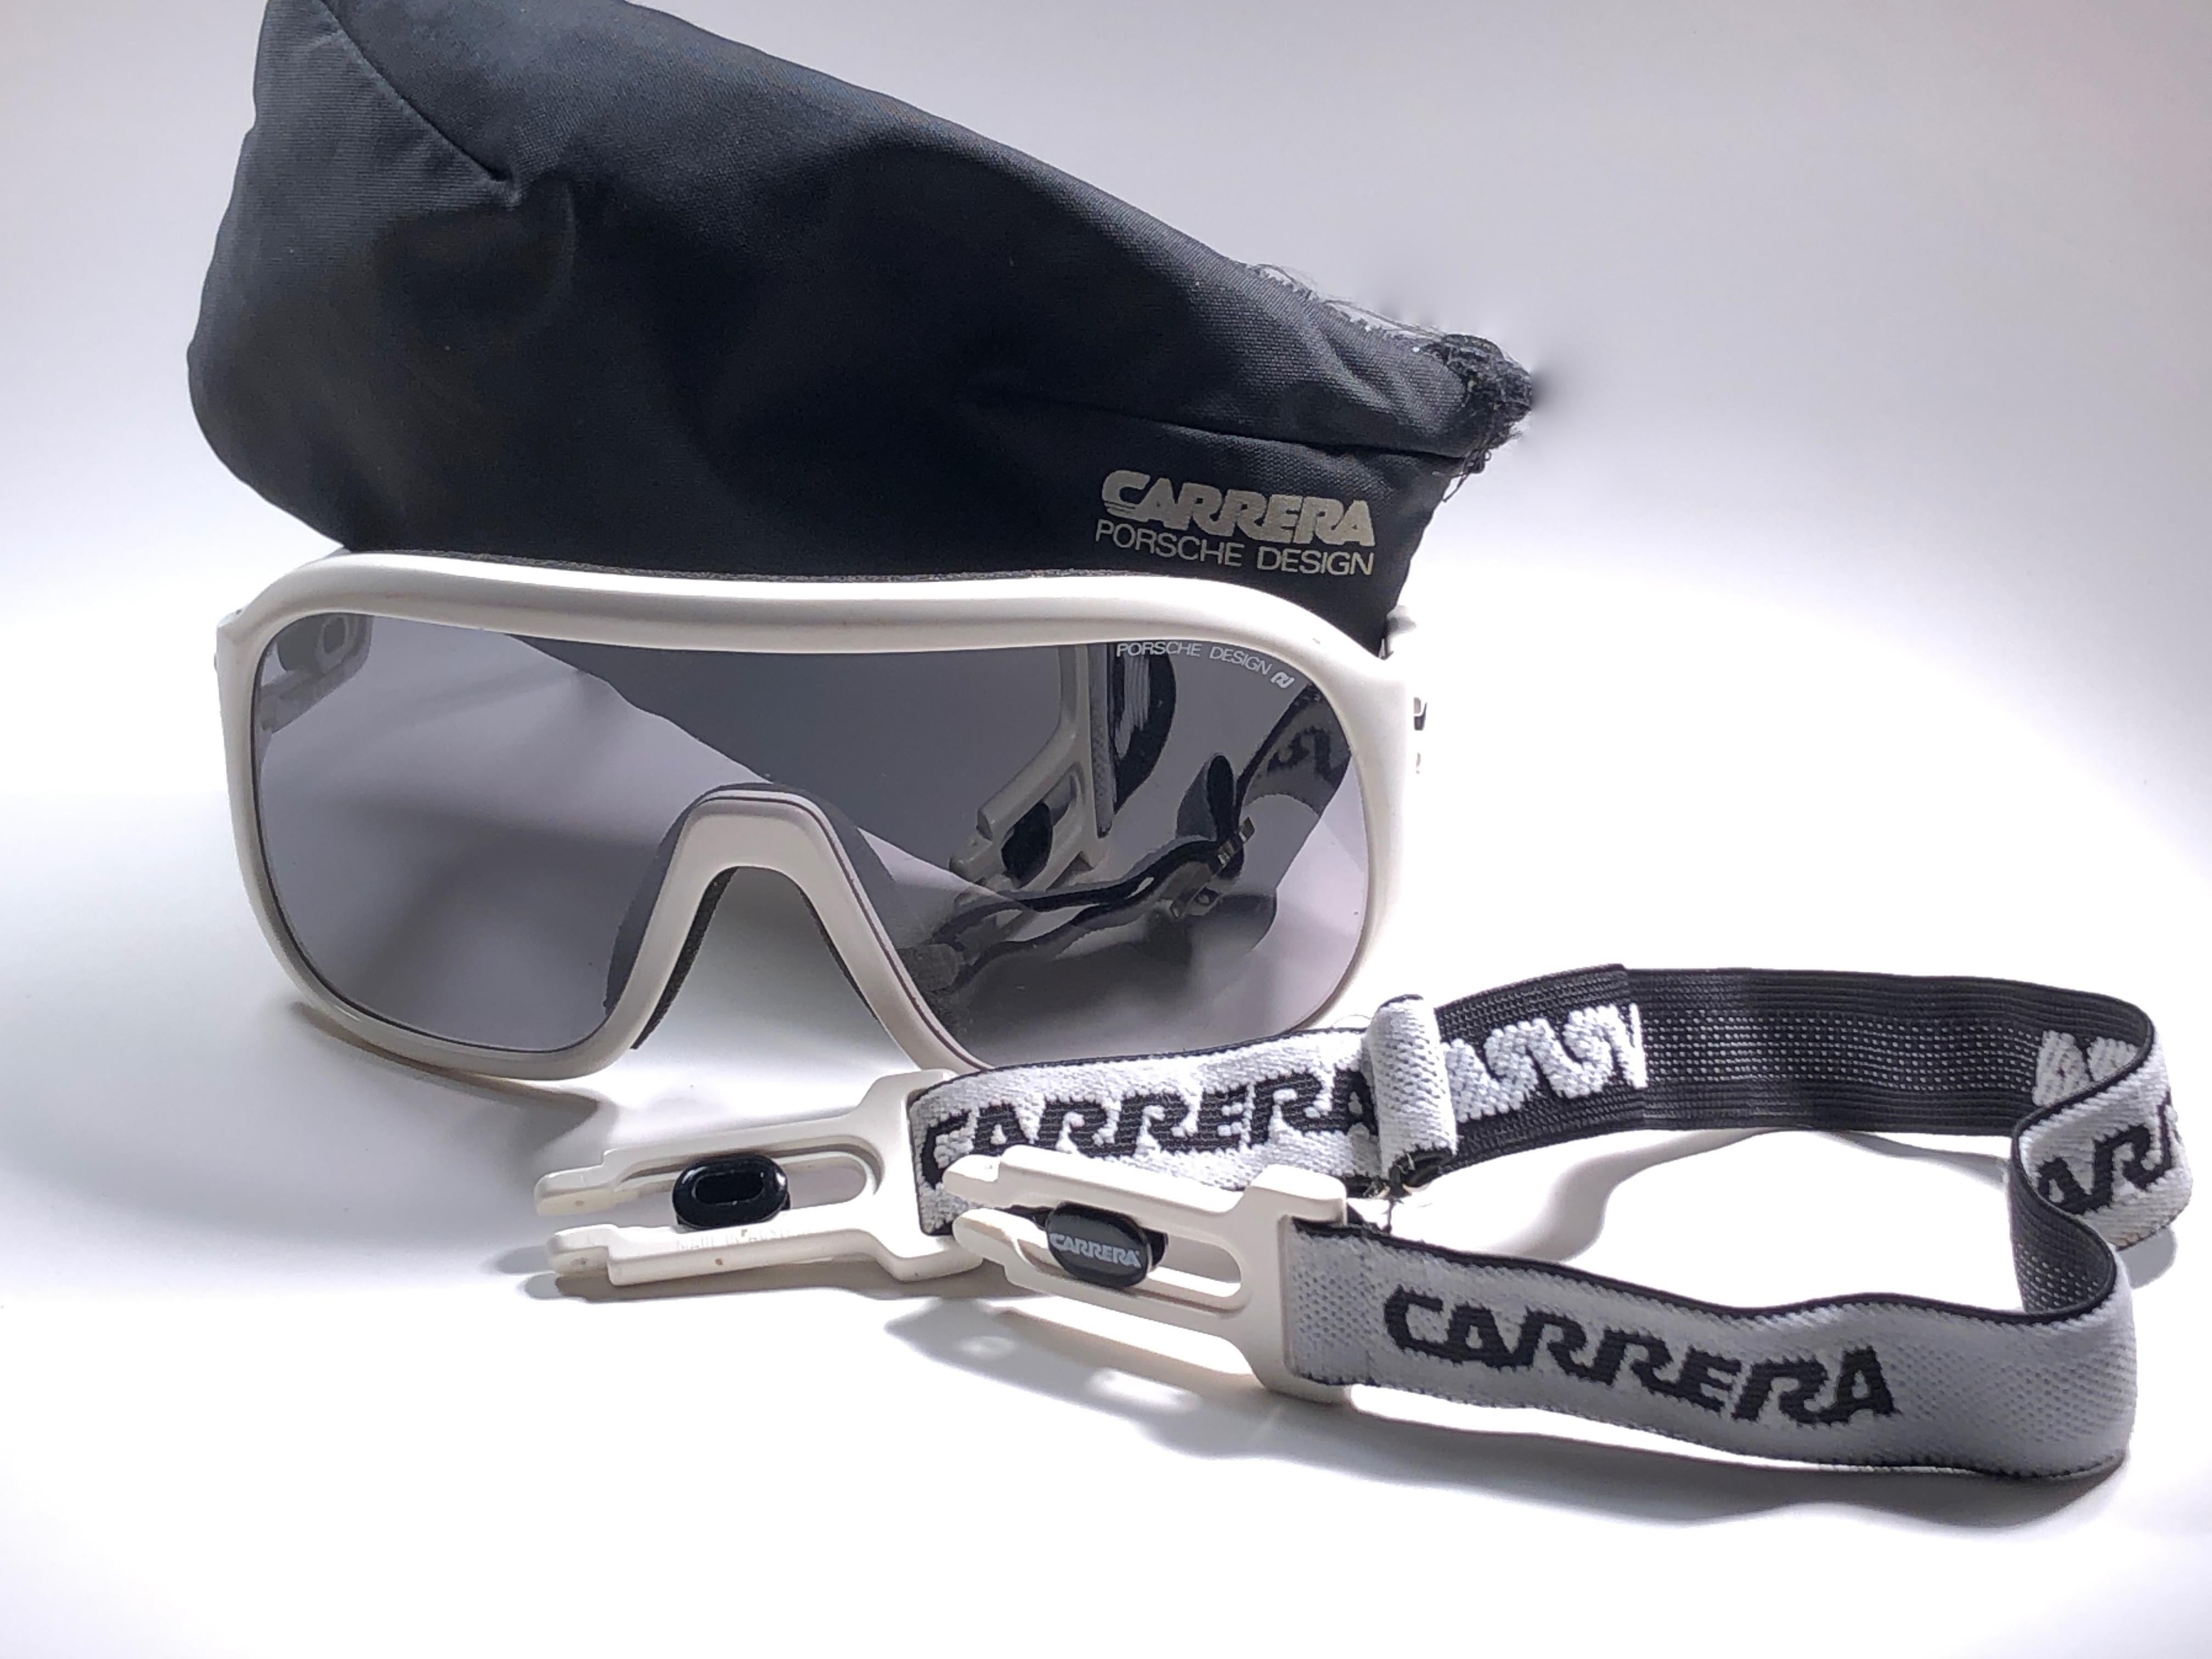 New 1980's Carrera ski oversized frame sporting grey mono lenses lenses. 
Amazing craftsmanship and quality. 

This item has some wear on it due to nearly 40 years of storage. 

Original pouch and elastic sports cord.

New, never worn. Made in